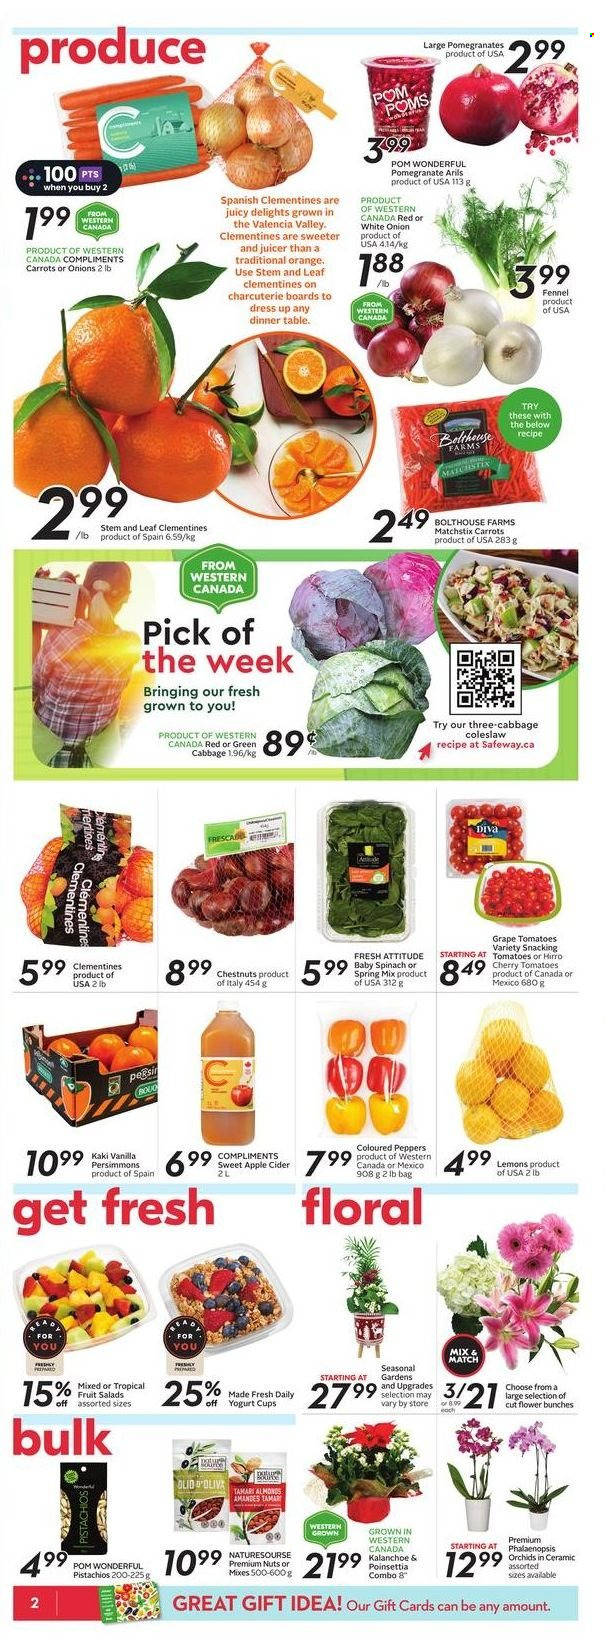 thumbnail - Safeway Flyer - November 24, 2022 - November 30, 2022 - Sales products - cabbage, tomatoes, onion, clementines, persimmons, oranges, pomegranate, lemons, coleslaw, fennel, chestnuts, pistachios, apple cider, cider, poinsettia, bunches. Page 3.